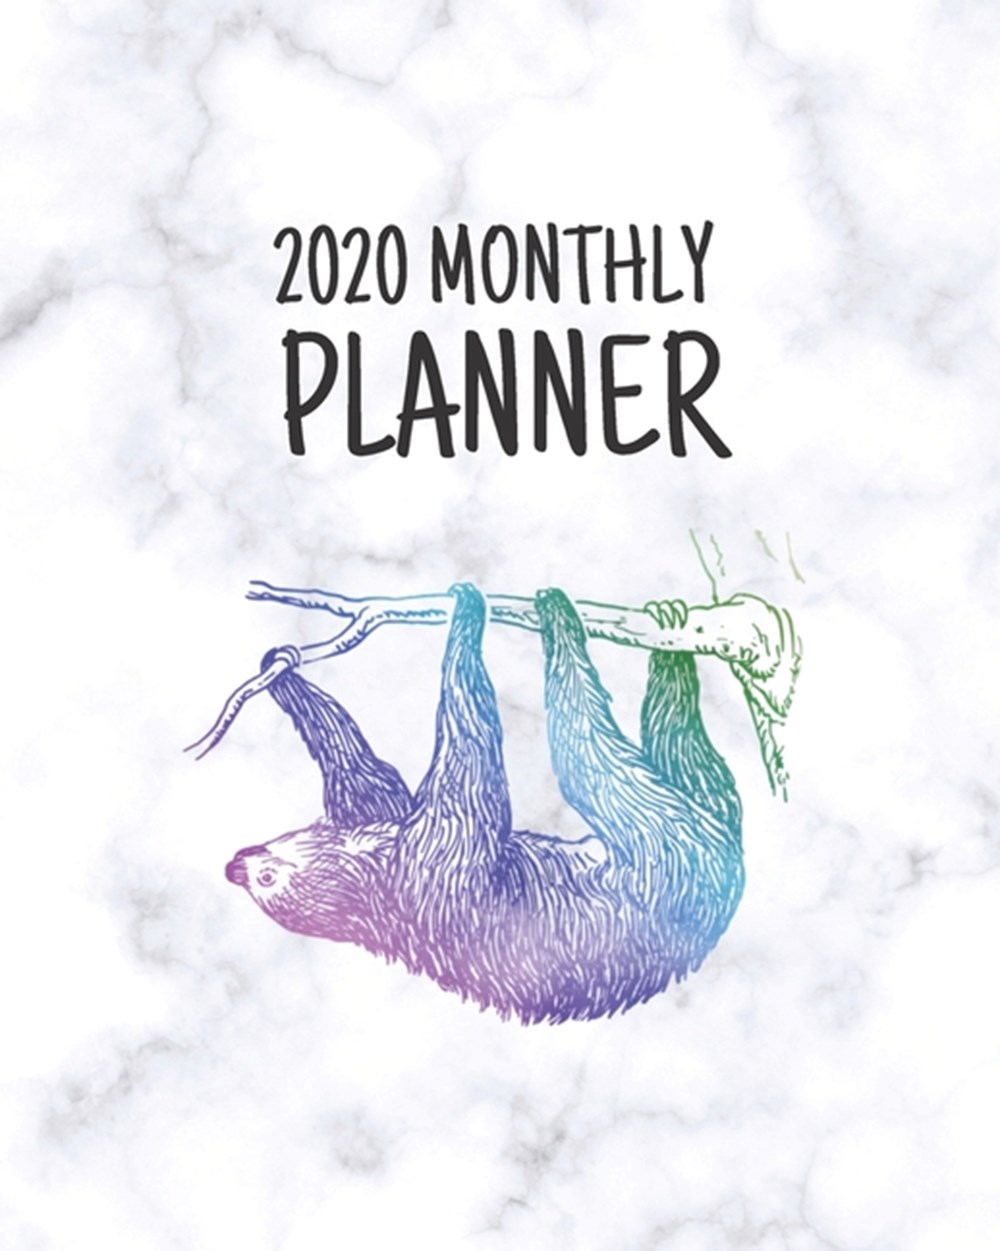 2020 Monthly Planner Inspirational Quotes - Habit Tracker - 2020 Goal Planner - January to December